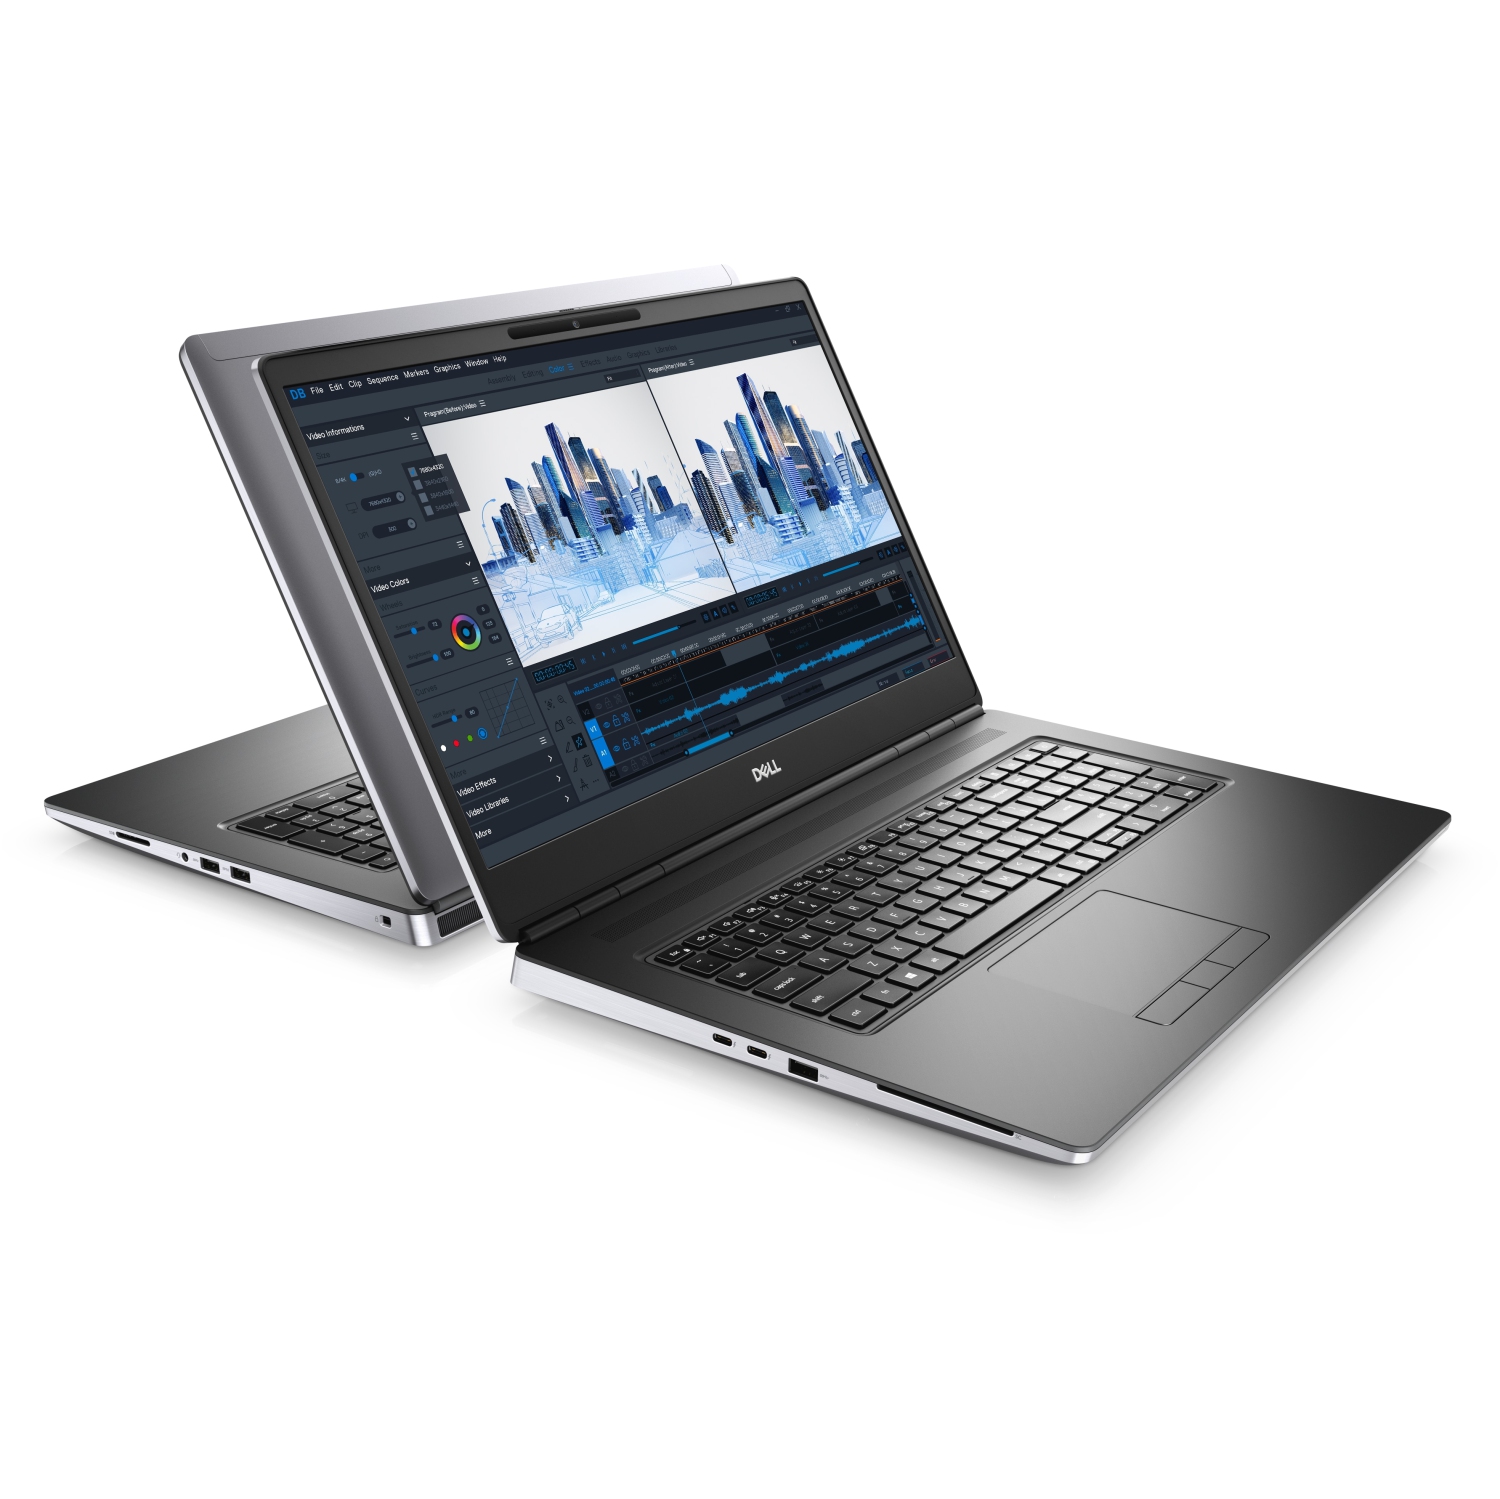 Refurbished (Excellent) - Dell Precision 7000 7760 Workstation Laptop (2021), 17.3" FHD, Core i7, 1TB SSD, 64GB RAM, RTX A5000, 4.8 GHz, 11th Gen CPU Certified